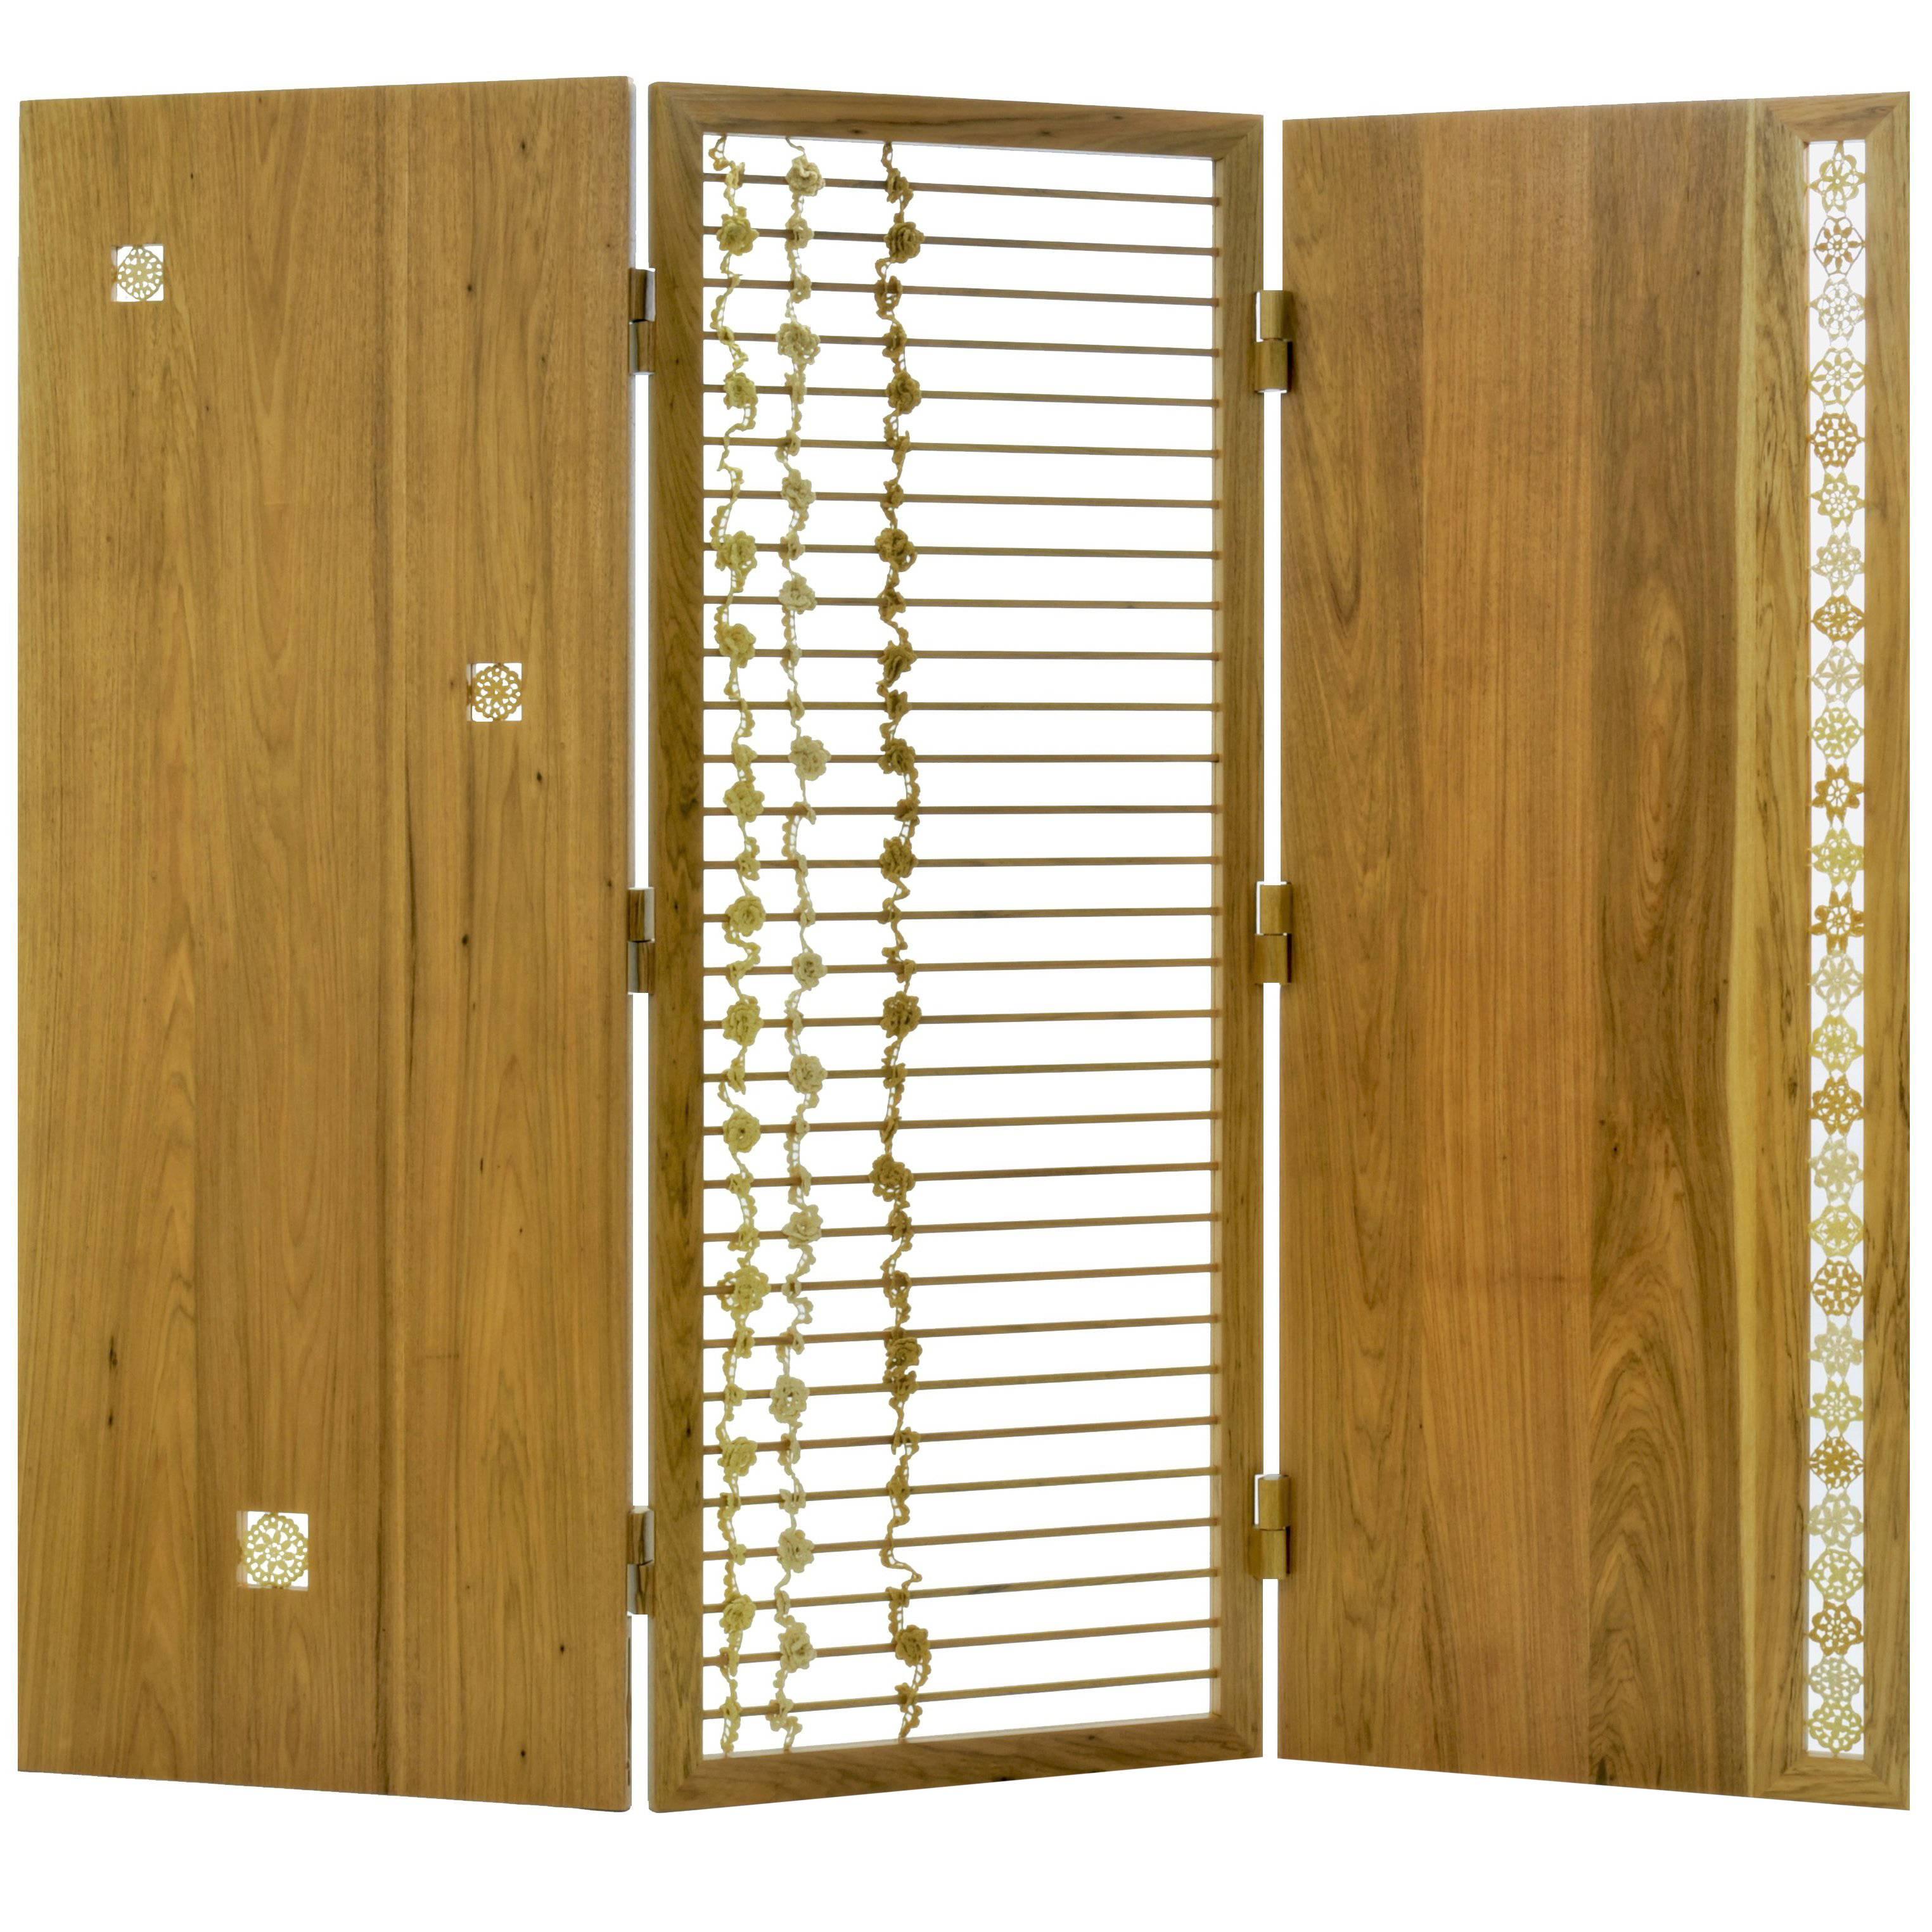 The Jardim folding screen is made of solid Brazilian walnut wood (Freijo´) and decorated with handmade crochet flowers using cotton threads in three different colors. 

The threads are naturally colored using fruits of the artisan’s orchard in Minas